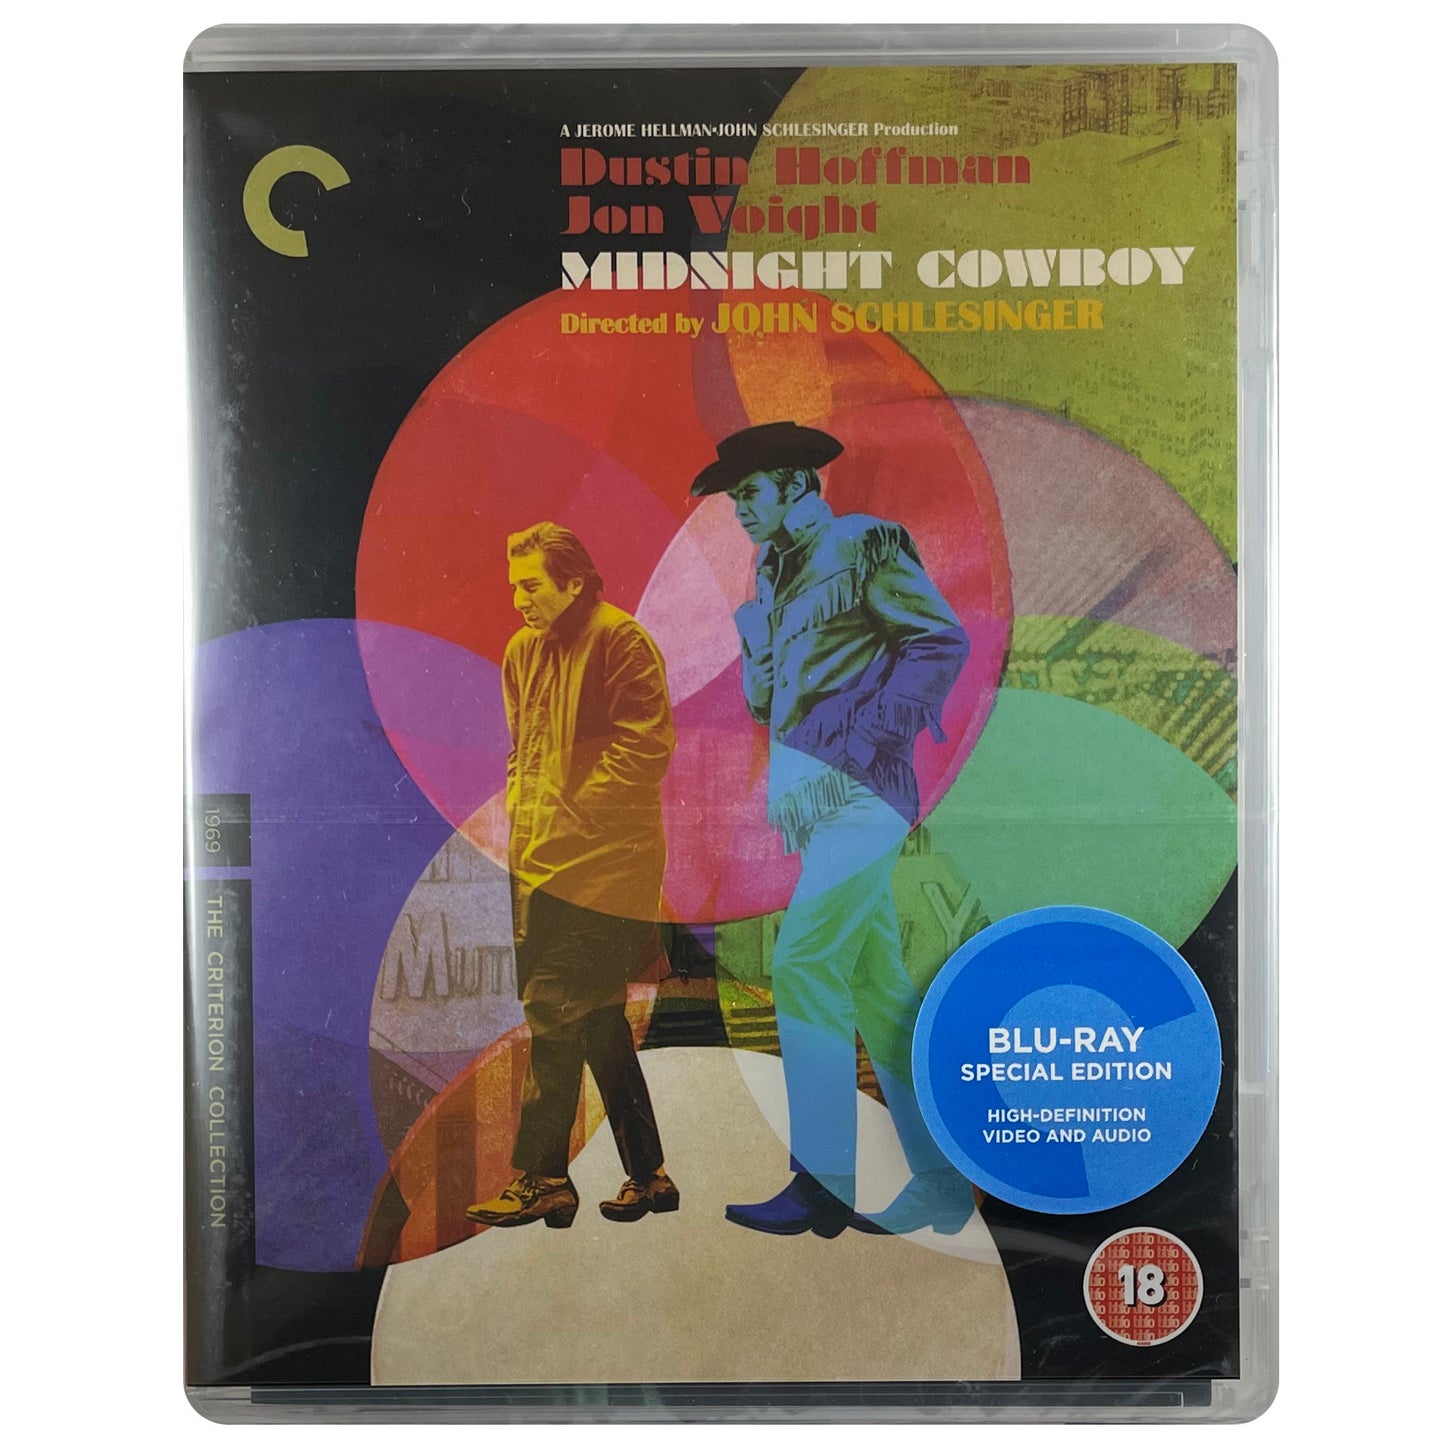 Midnight Cowboy (Criterion Collection) Blu-Ray